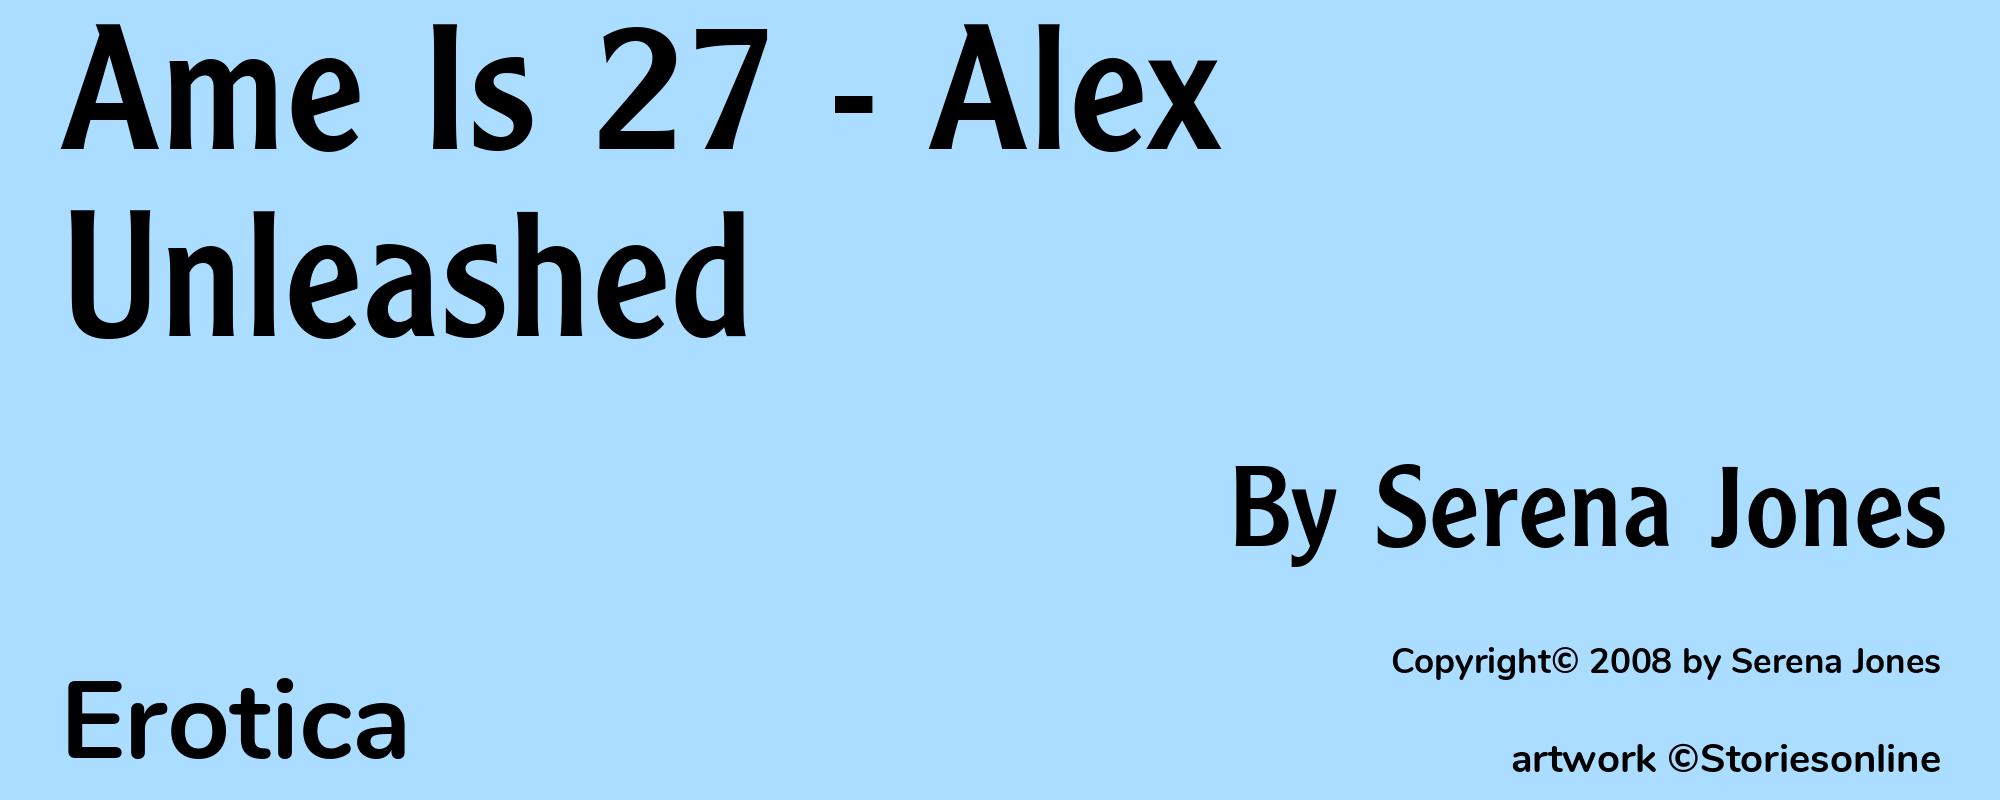 Ame Is 27 - Alex Unleashed - Cover